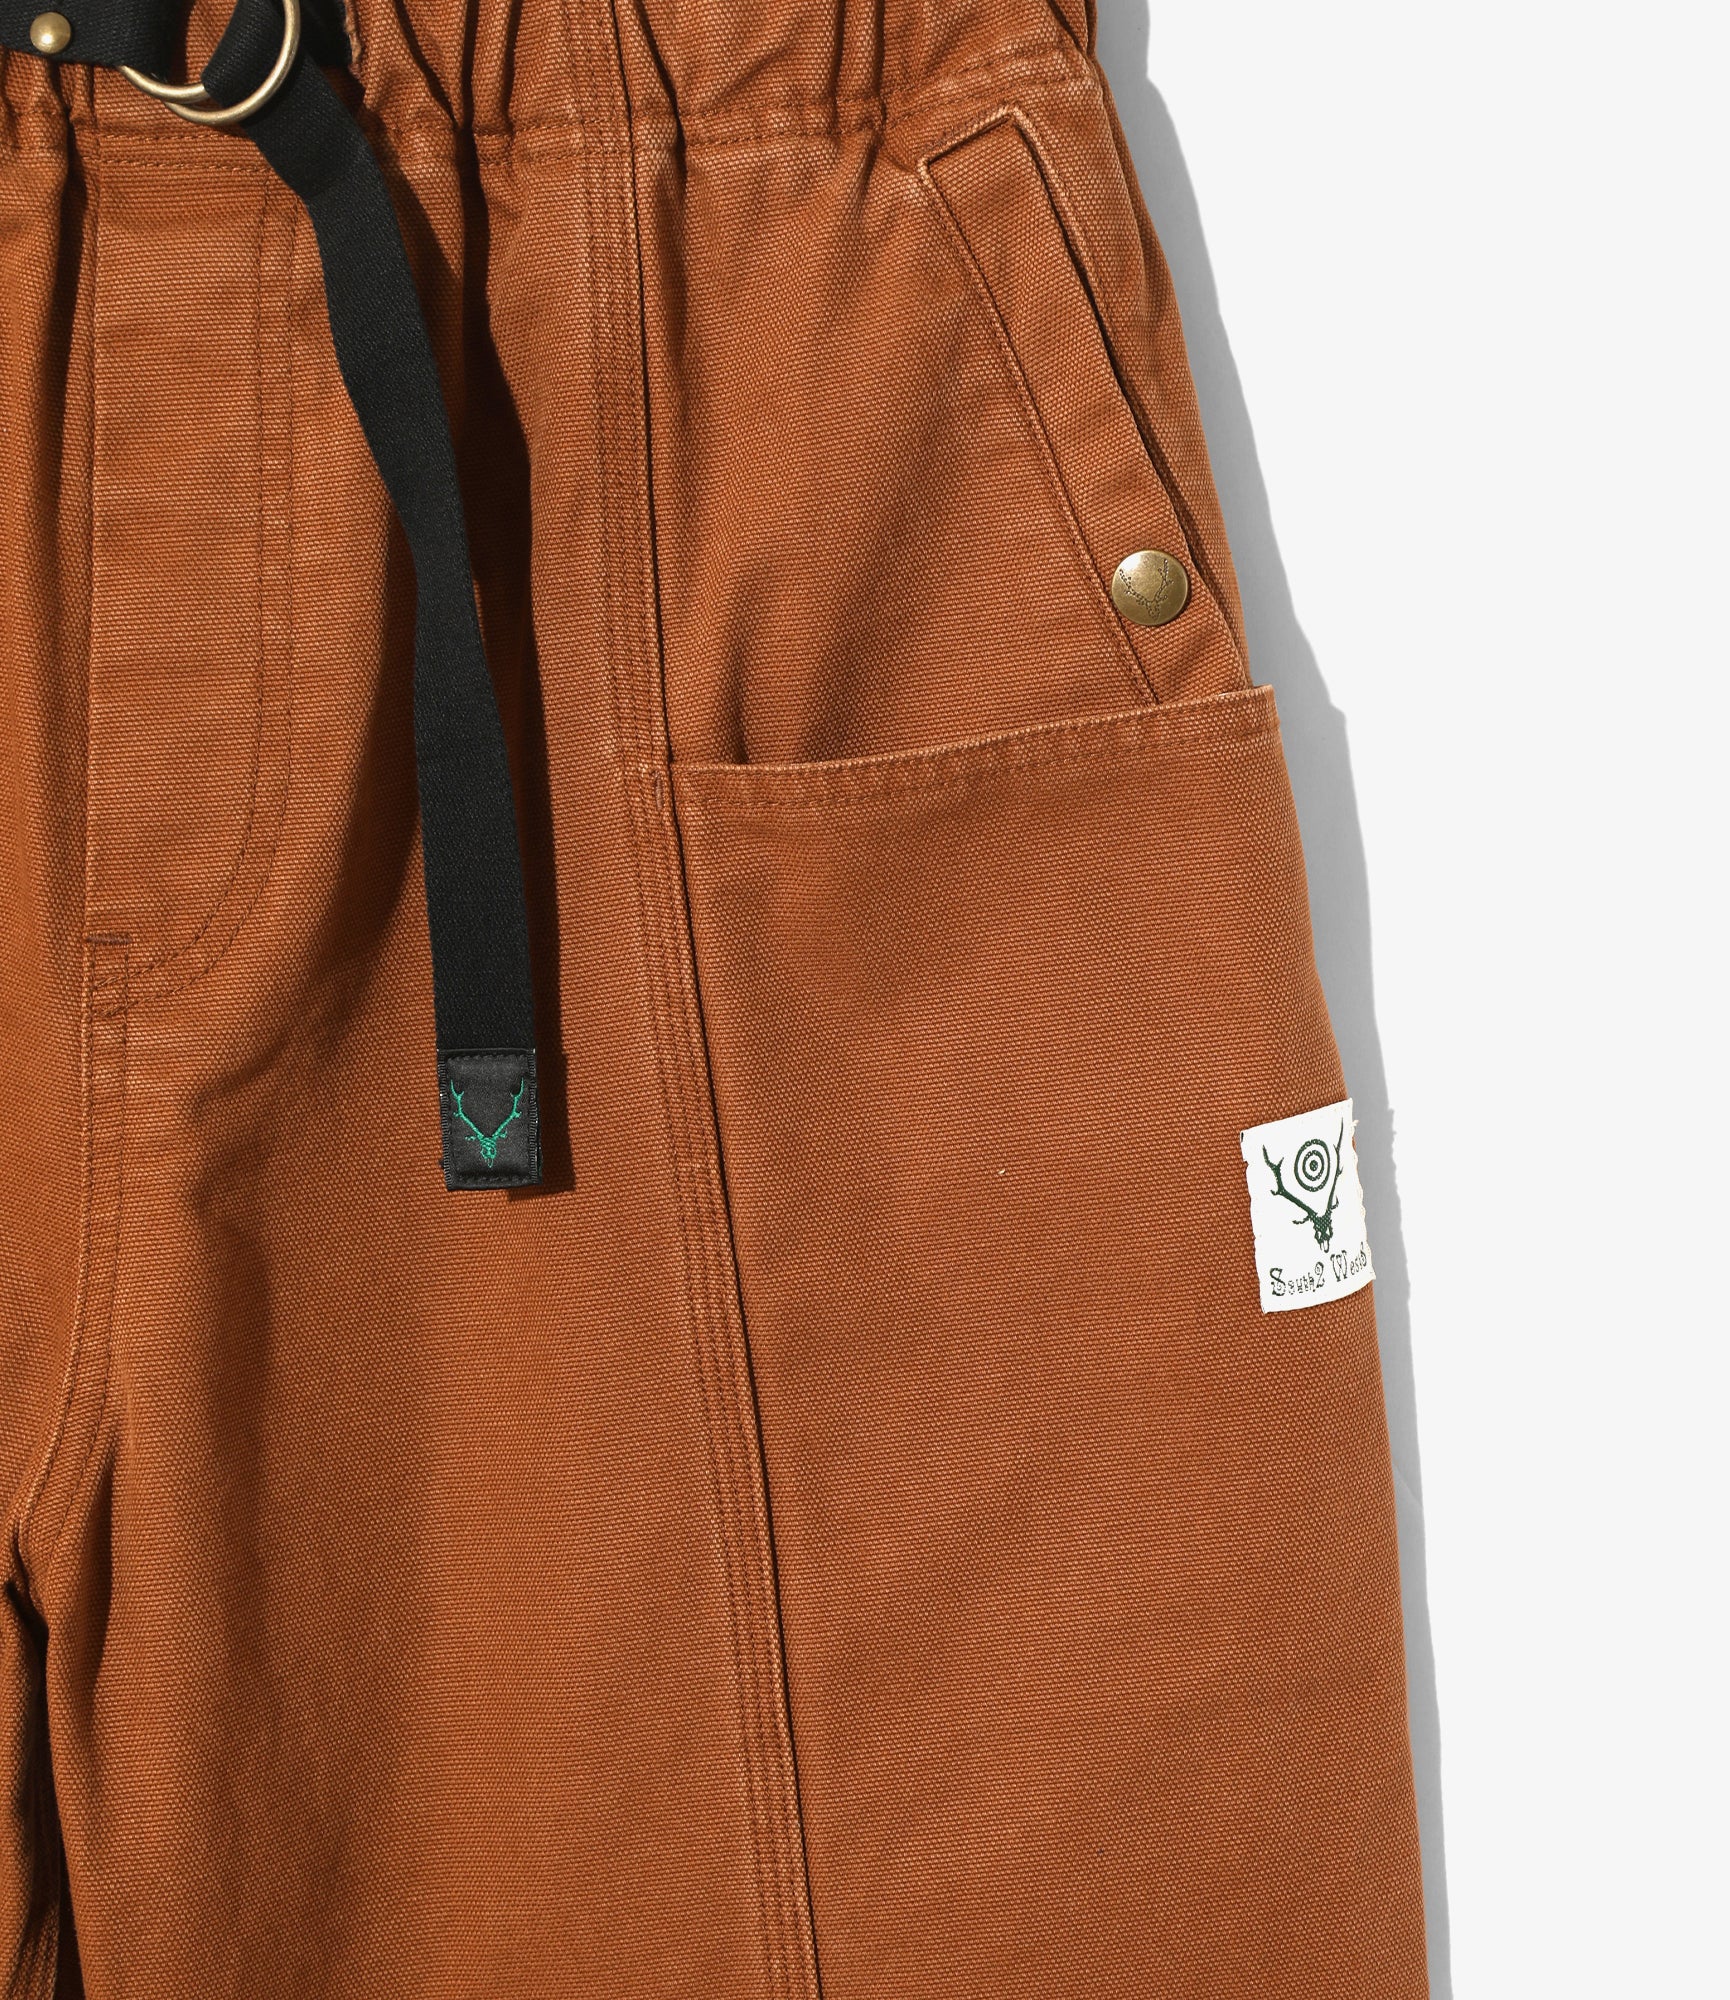 South2 West8 Belted C.S. Pant - 11.5oz Cotton Canvas - Brown